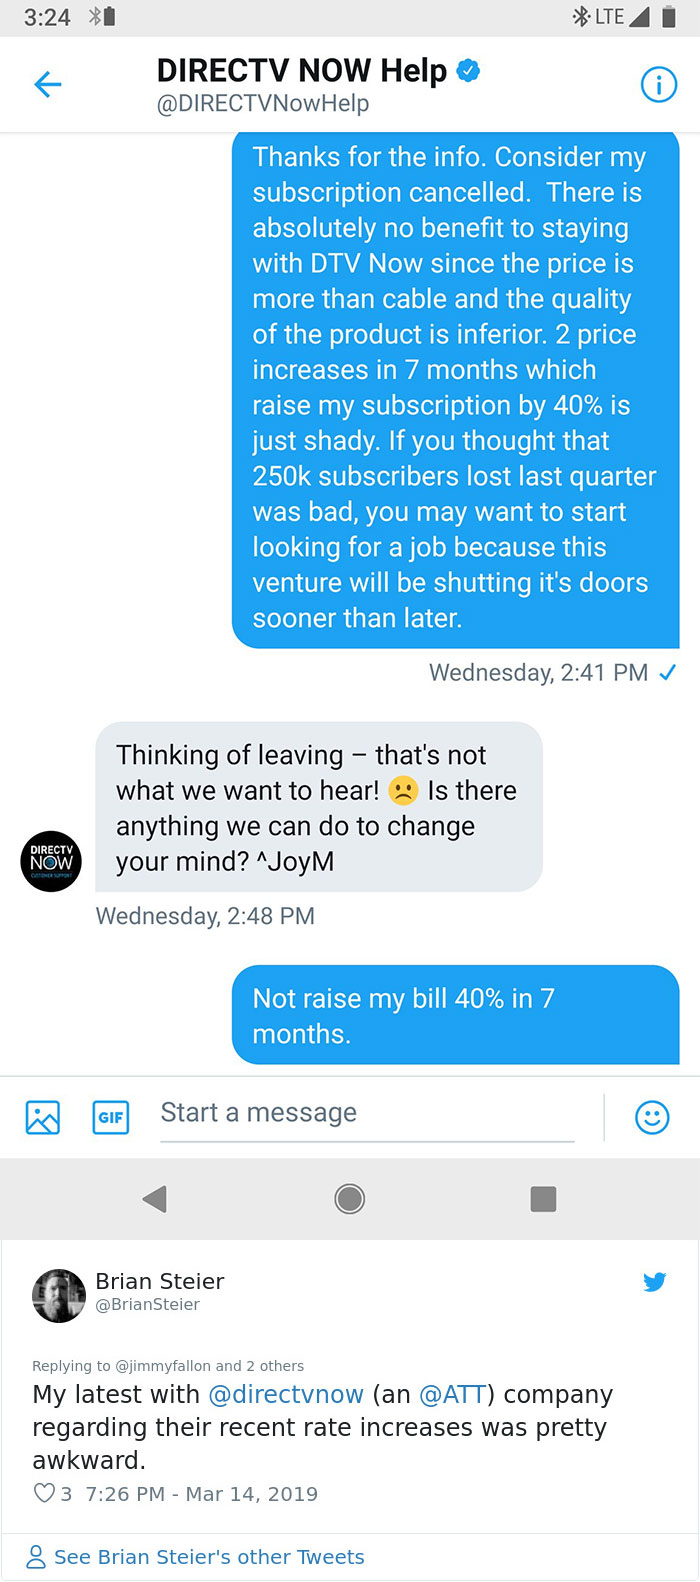 funny and awkward texts - 1 Lte Directv Now Help Thanks for the info. Consider my subscription cancelled. There is absolutely no benefit to staying with Dtv Now since the price is more than cable and the quality of the product is inferior. 2 price increas